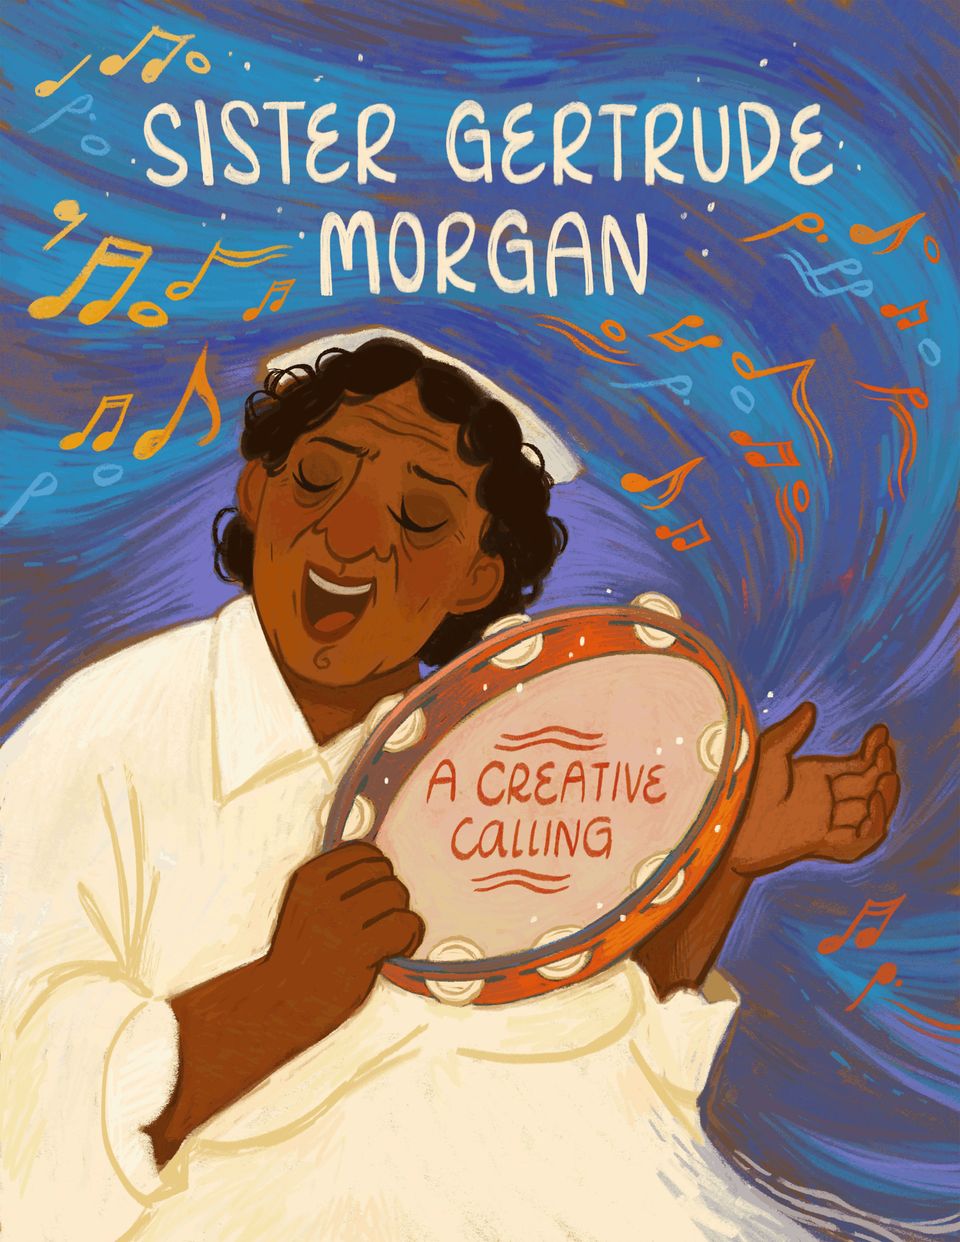 Sister Gertrude Morgan sits against a blue backdrop playing the tambourine and singing. Text reads: "Sister Gertrude Morgan: A Creative Calling."